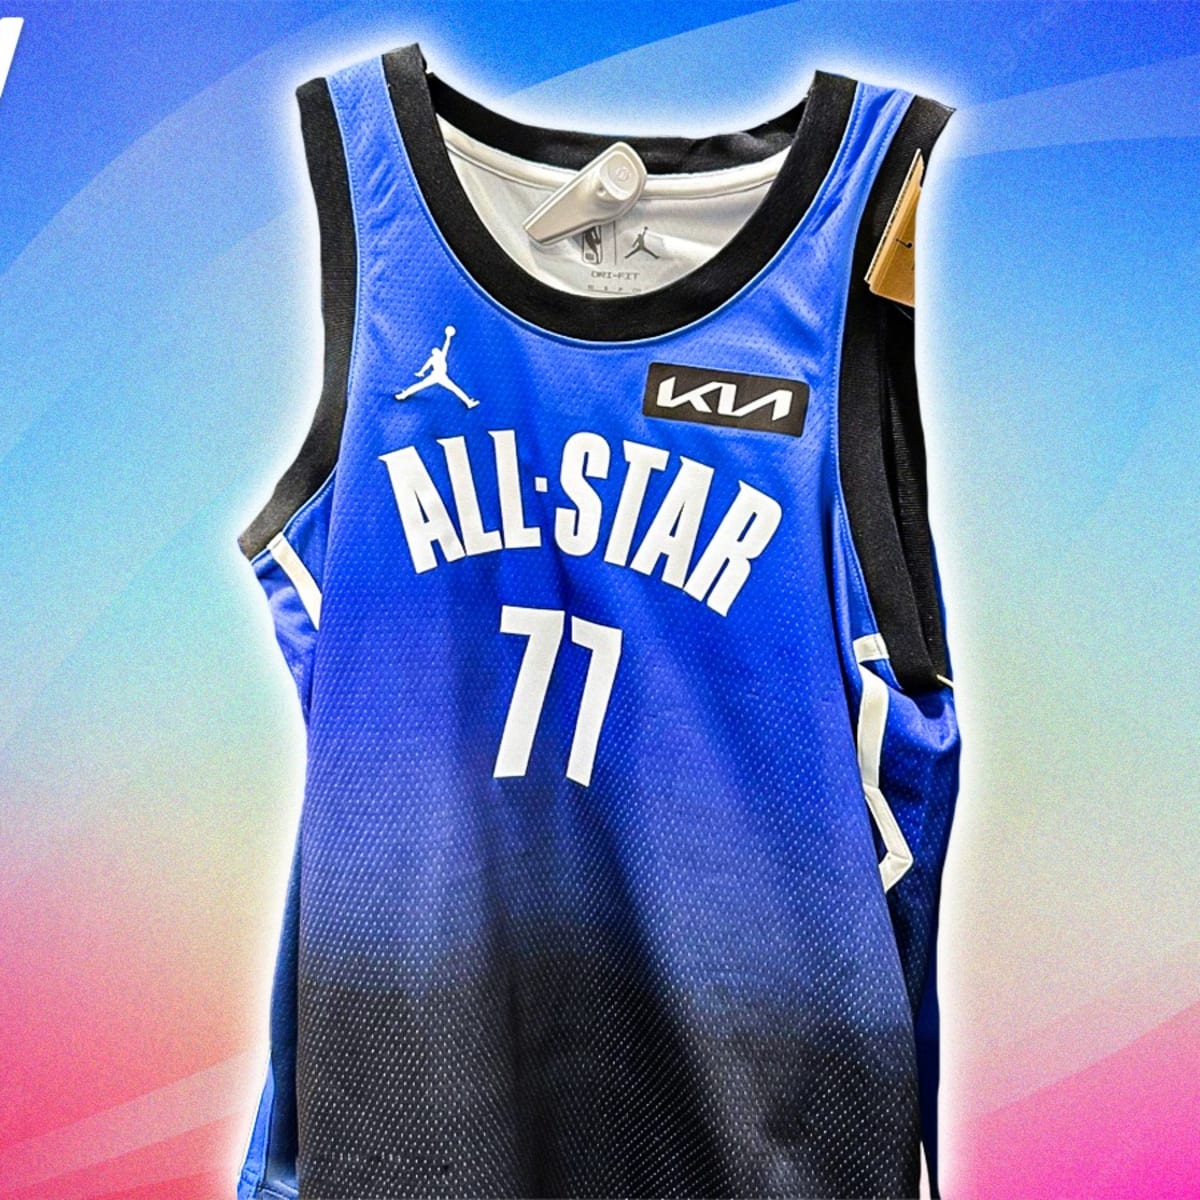 2023 NBA All-Star Game jerseys: What's the story behind the design? - AS USA